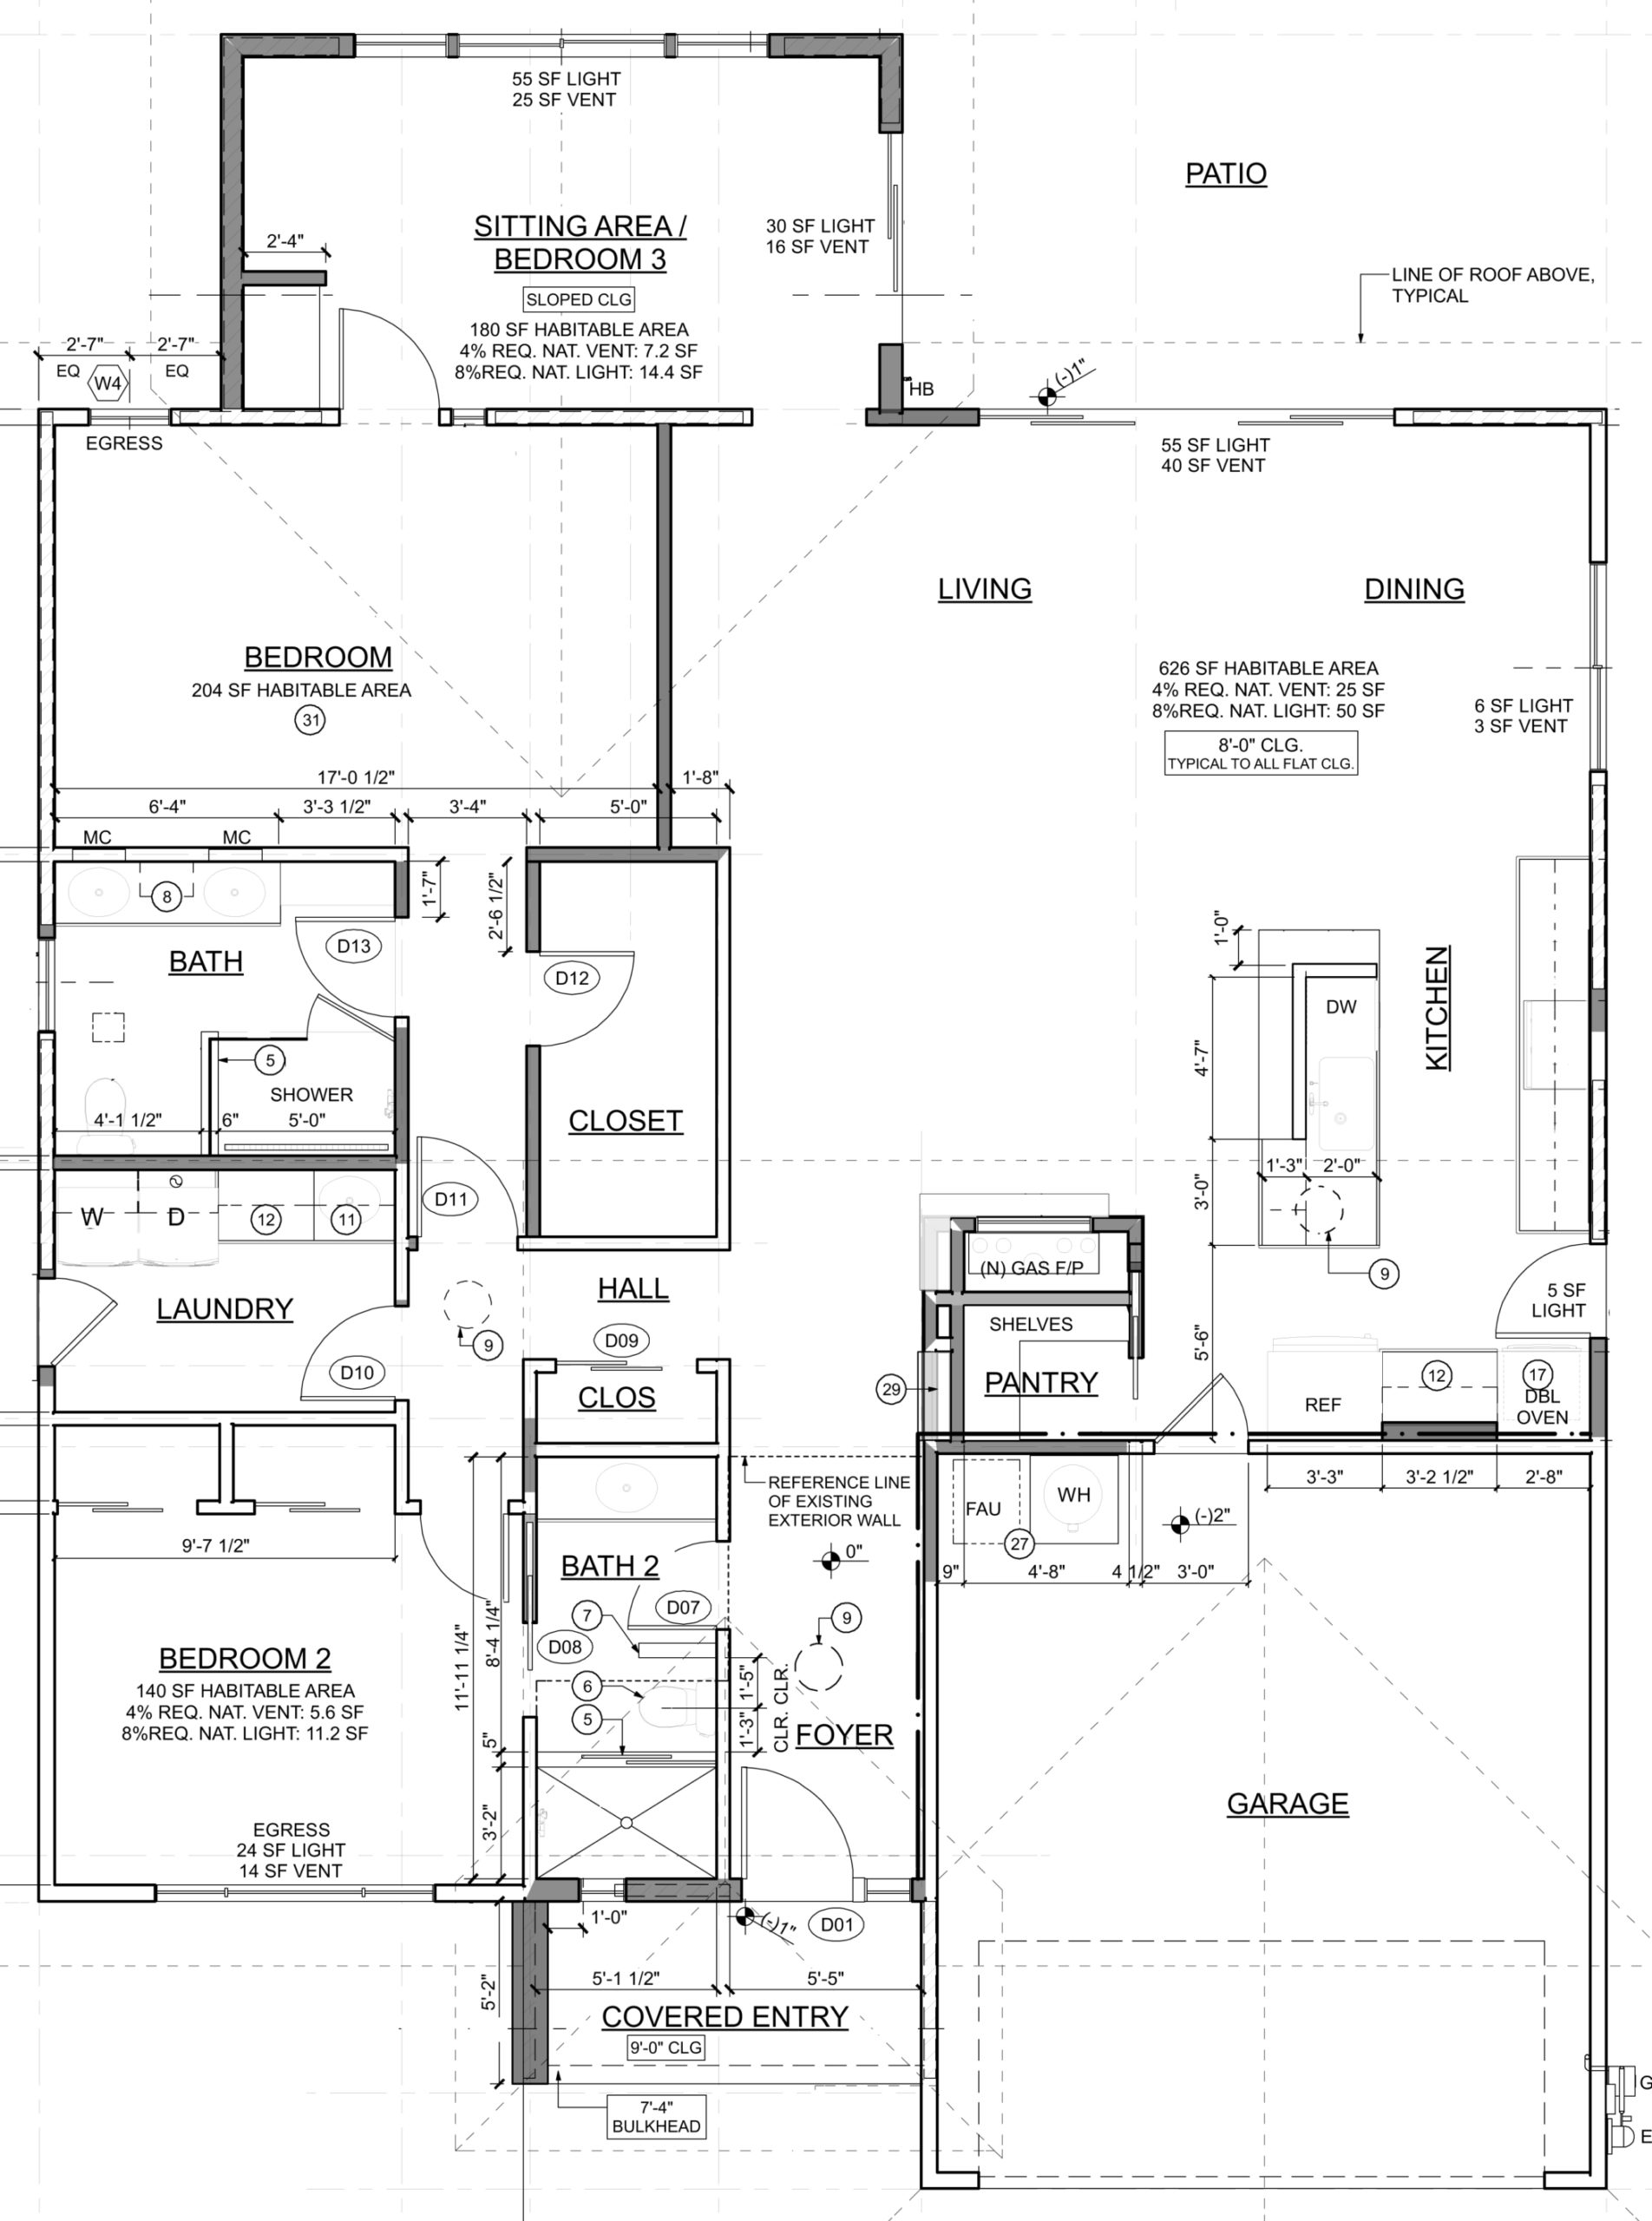 Proposed floor plan for permit